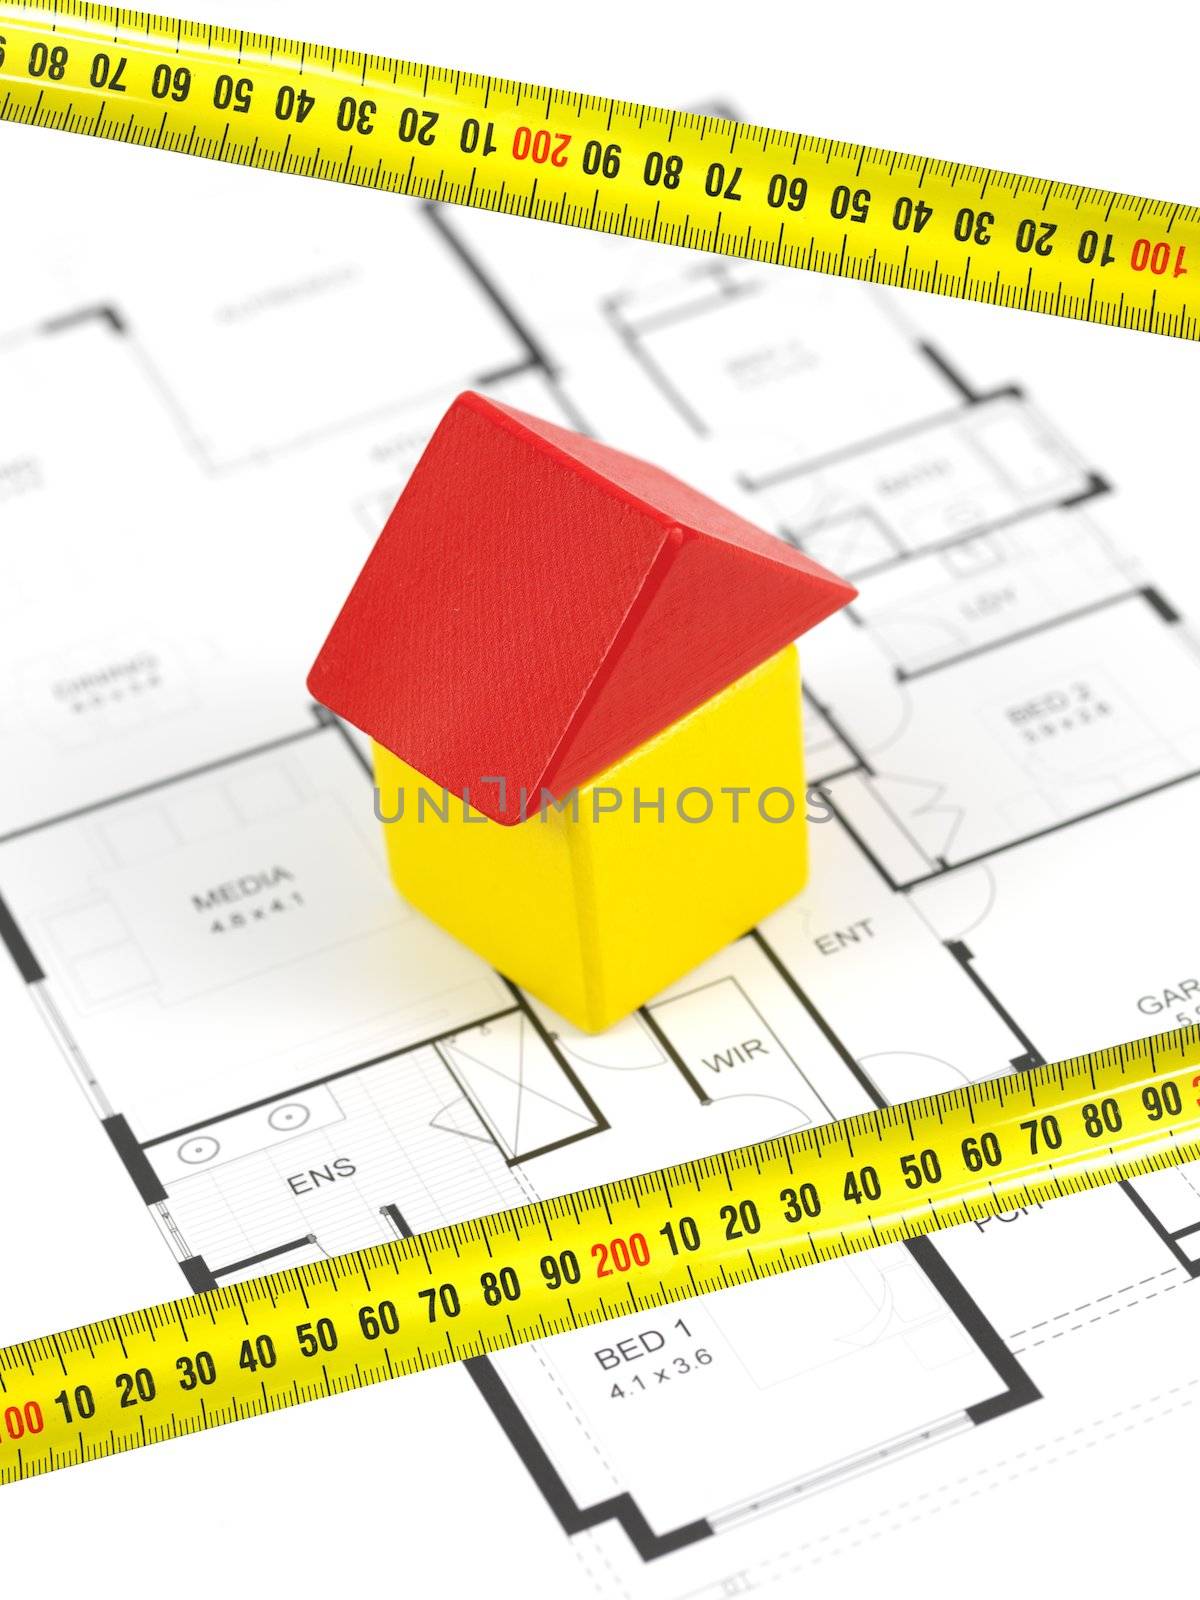 House plans isolated against a white background